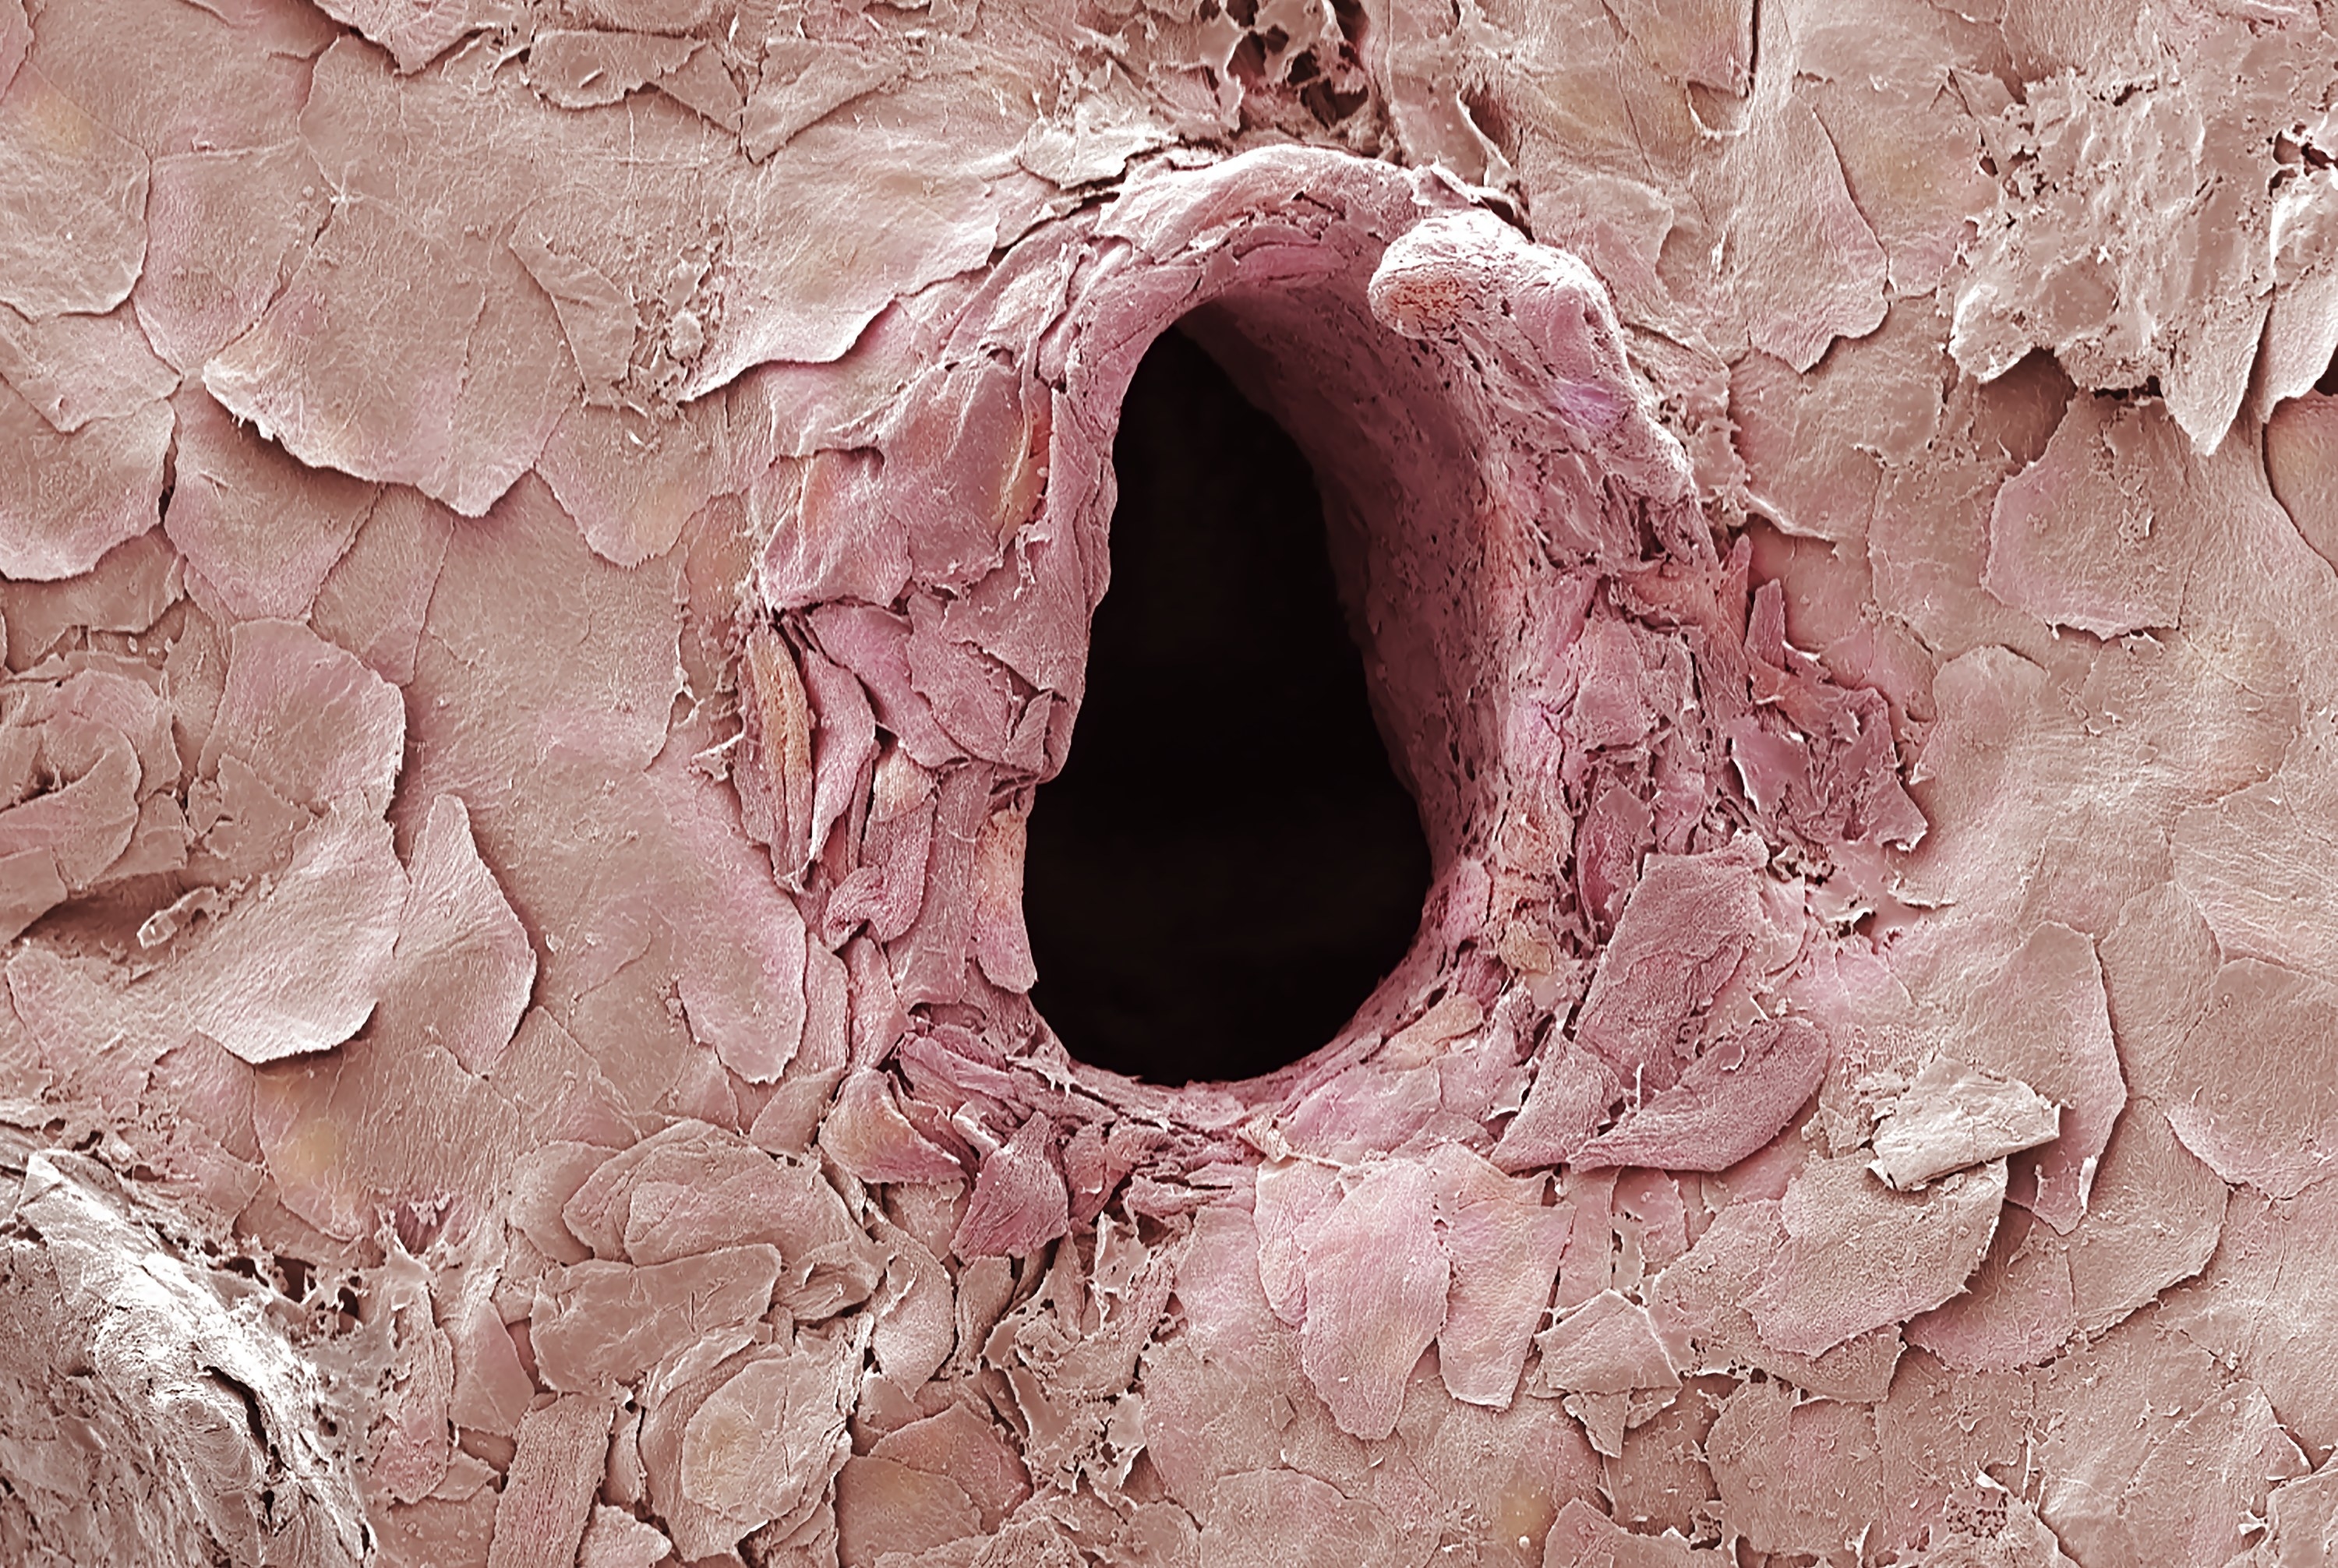 Pinkish, flaky surface with a large, raised hole in the middle